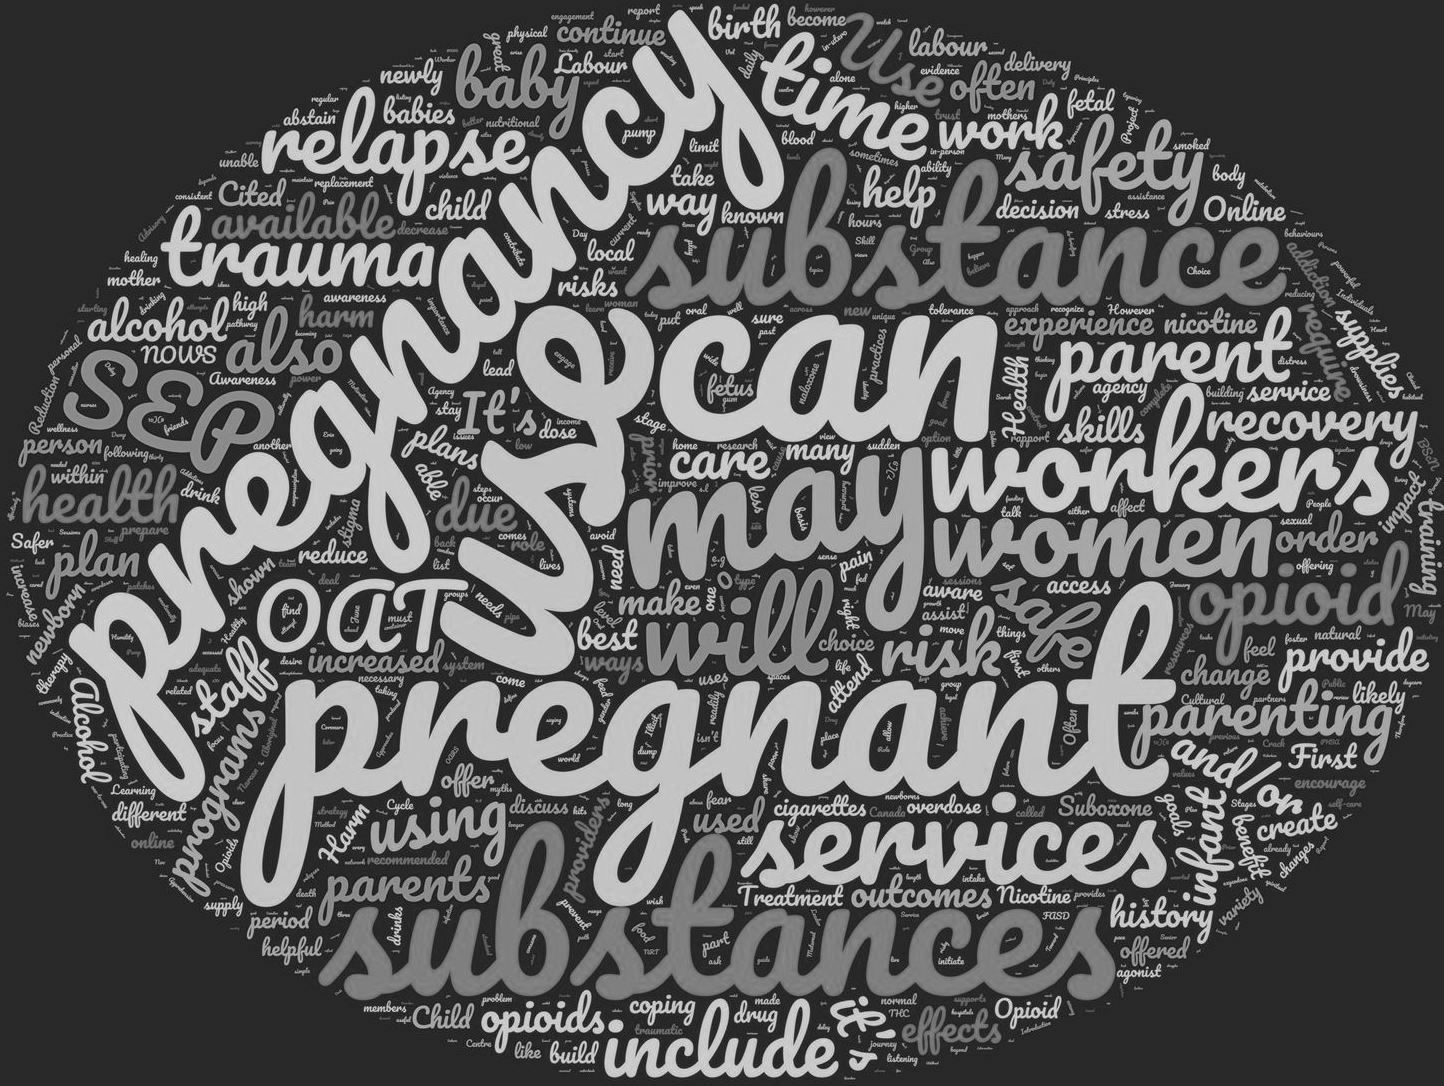 black and grey image of a word bubble depicting language associated with perinatal substance use including words like: pregnancy, OAT, use, pregnant, services, workers, women, substance, time, safety, relapse, using, trauma, alcohol, parent, recovery 